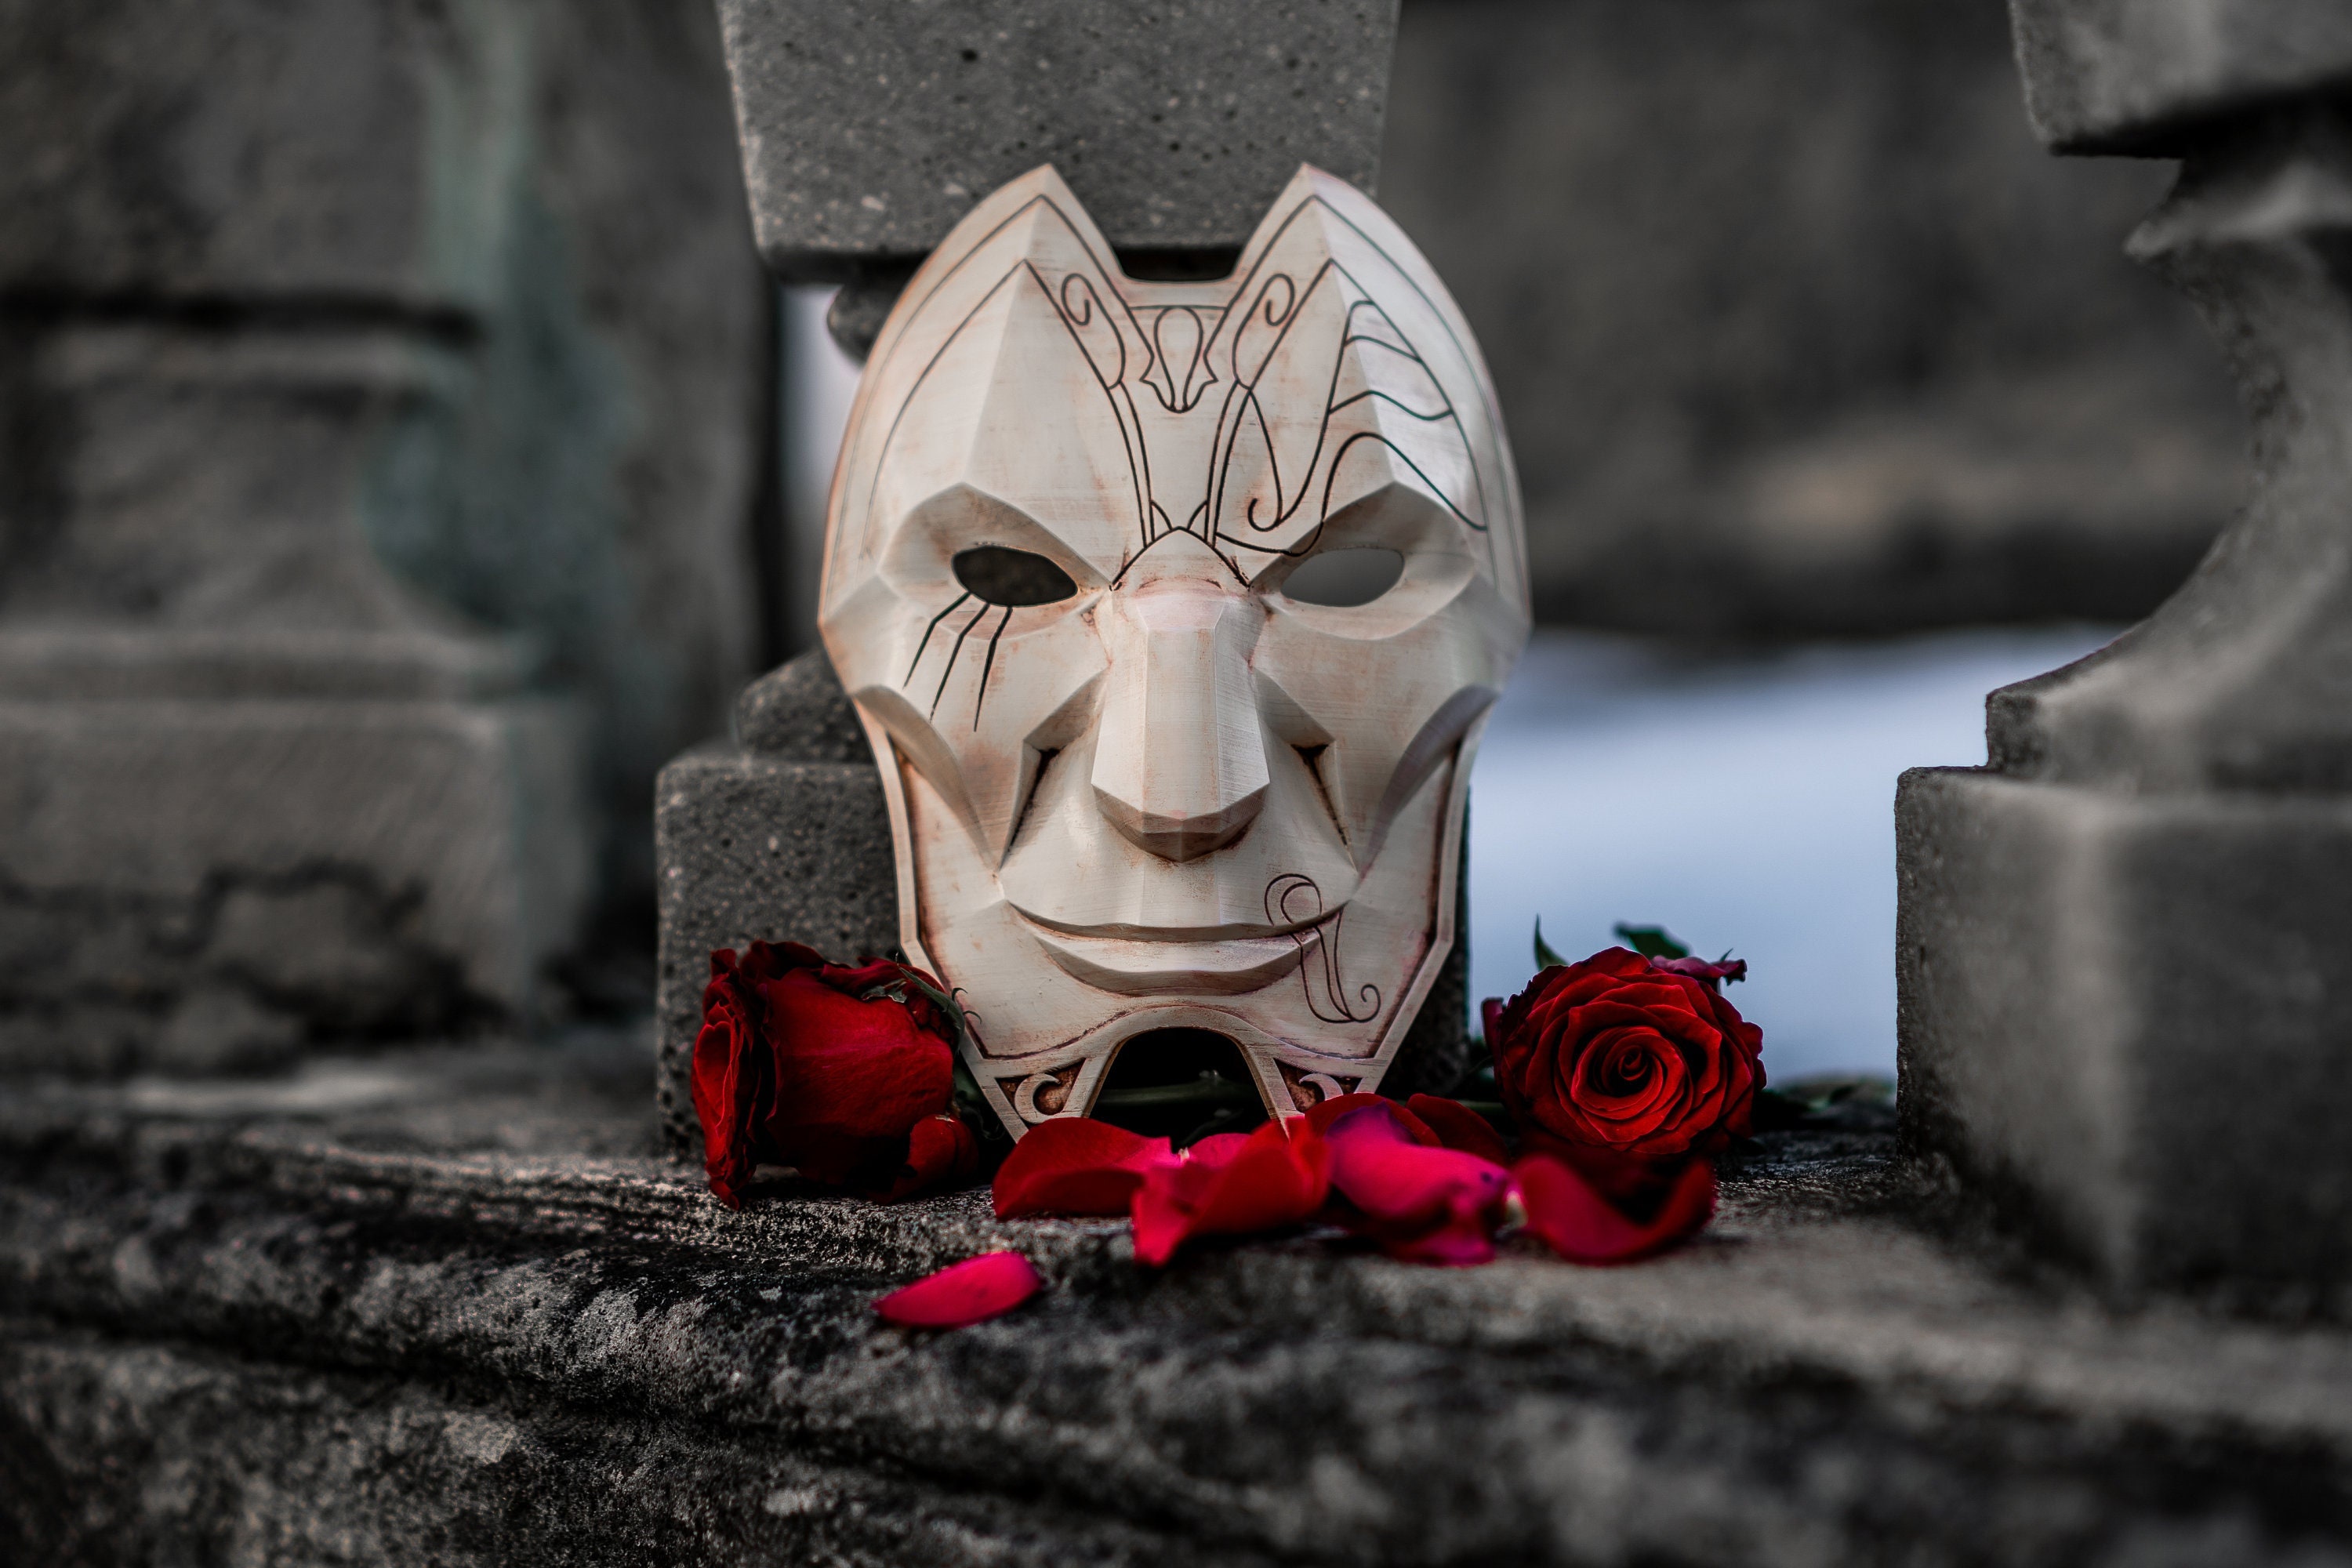 tuberkulose skandaløse modstand Jhin the Virtuoso's Mask Mask Replica From League of - Etsy Finland